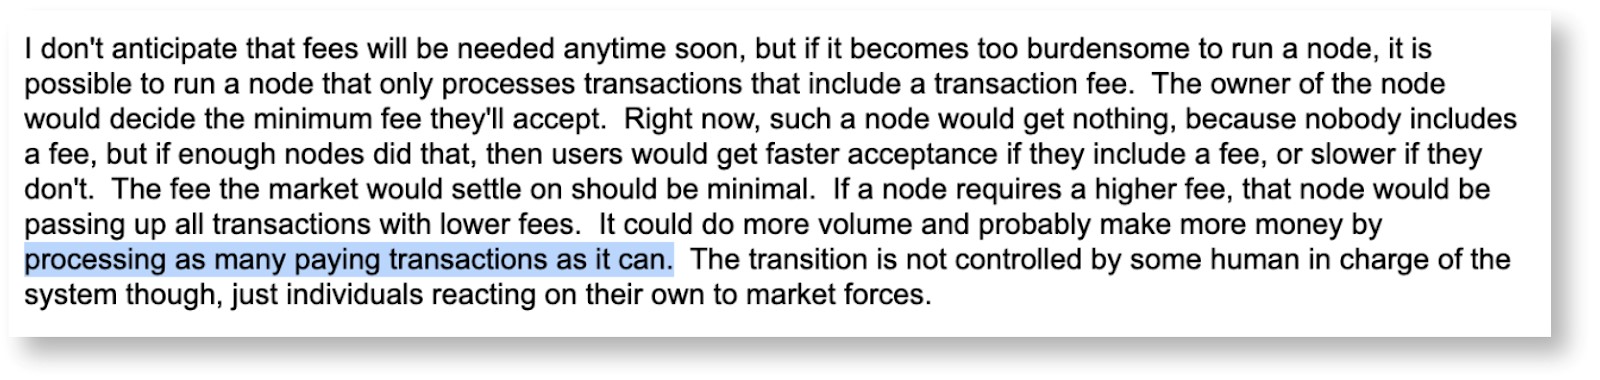 to process as many transactions as possible 